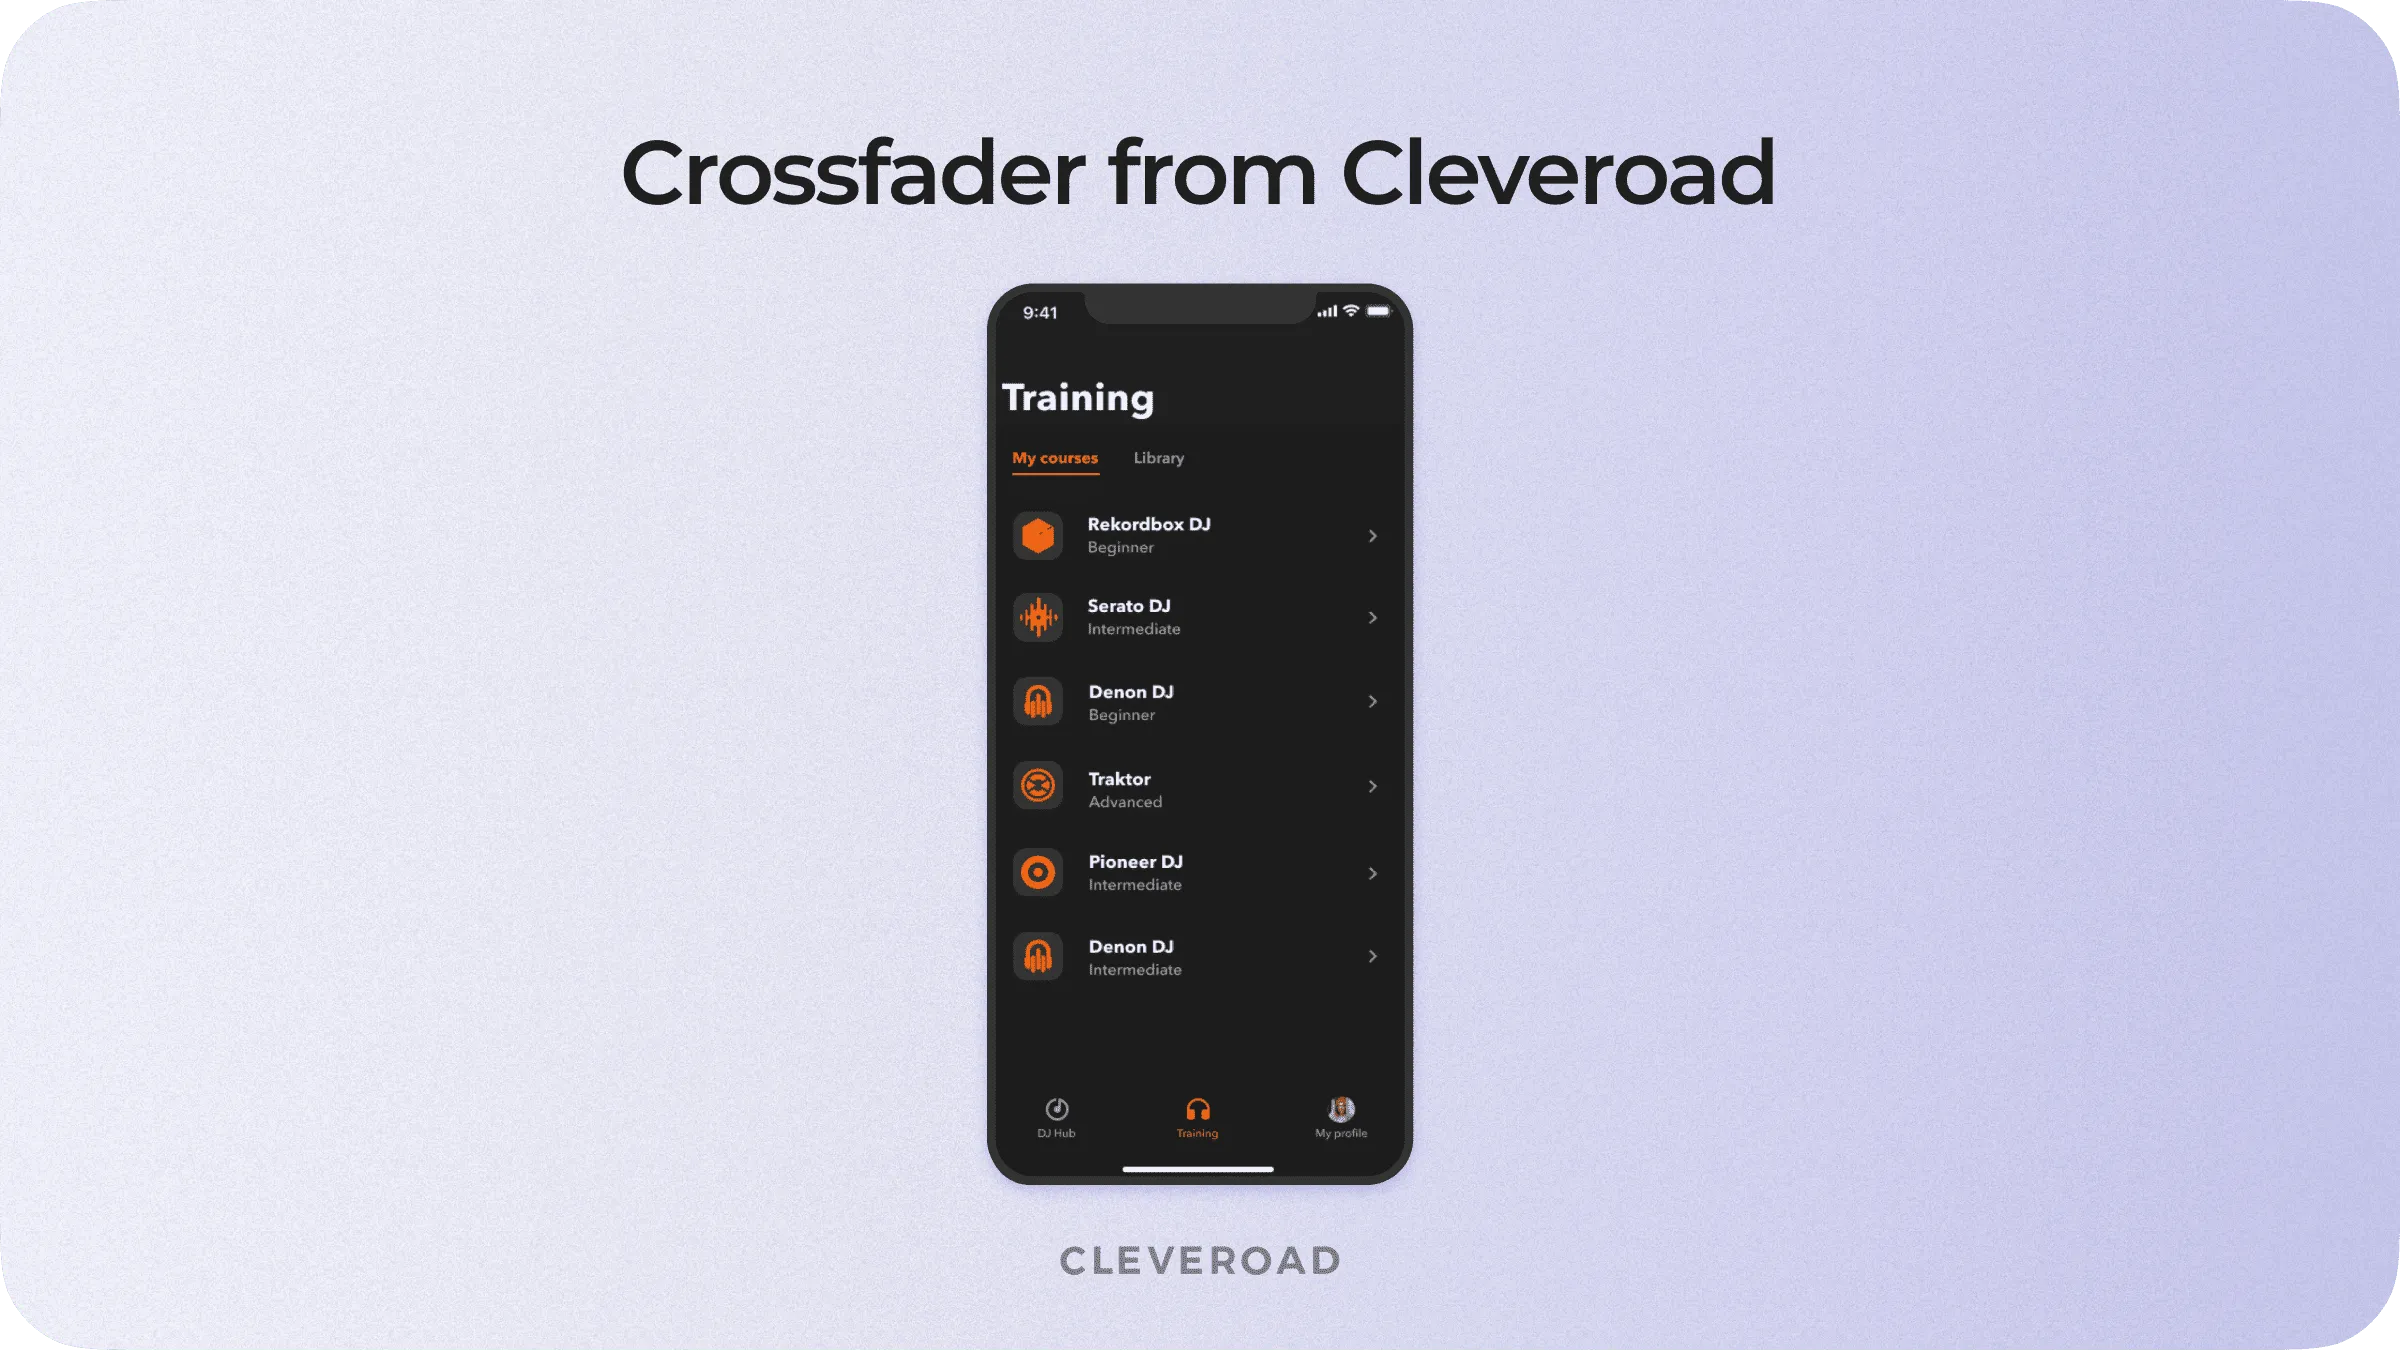 Crossfader from Cleveroad